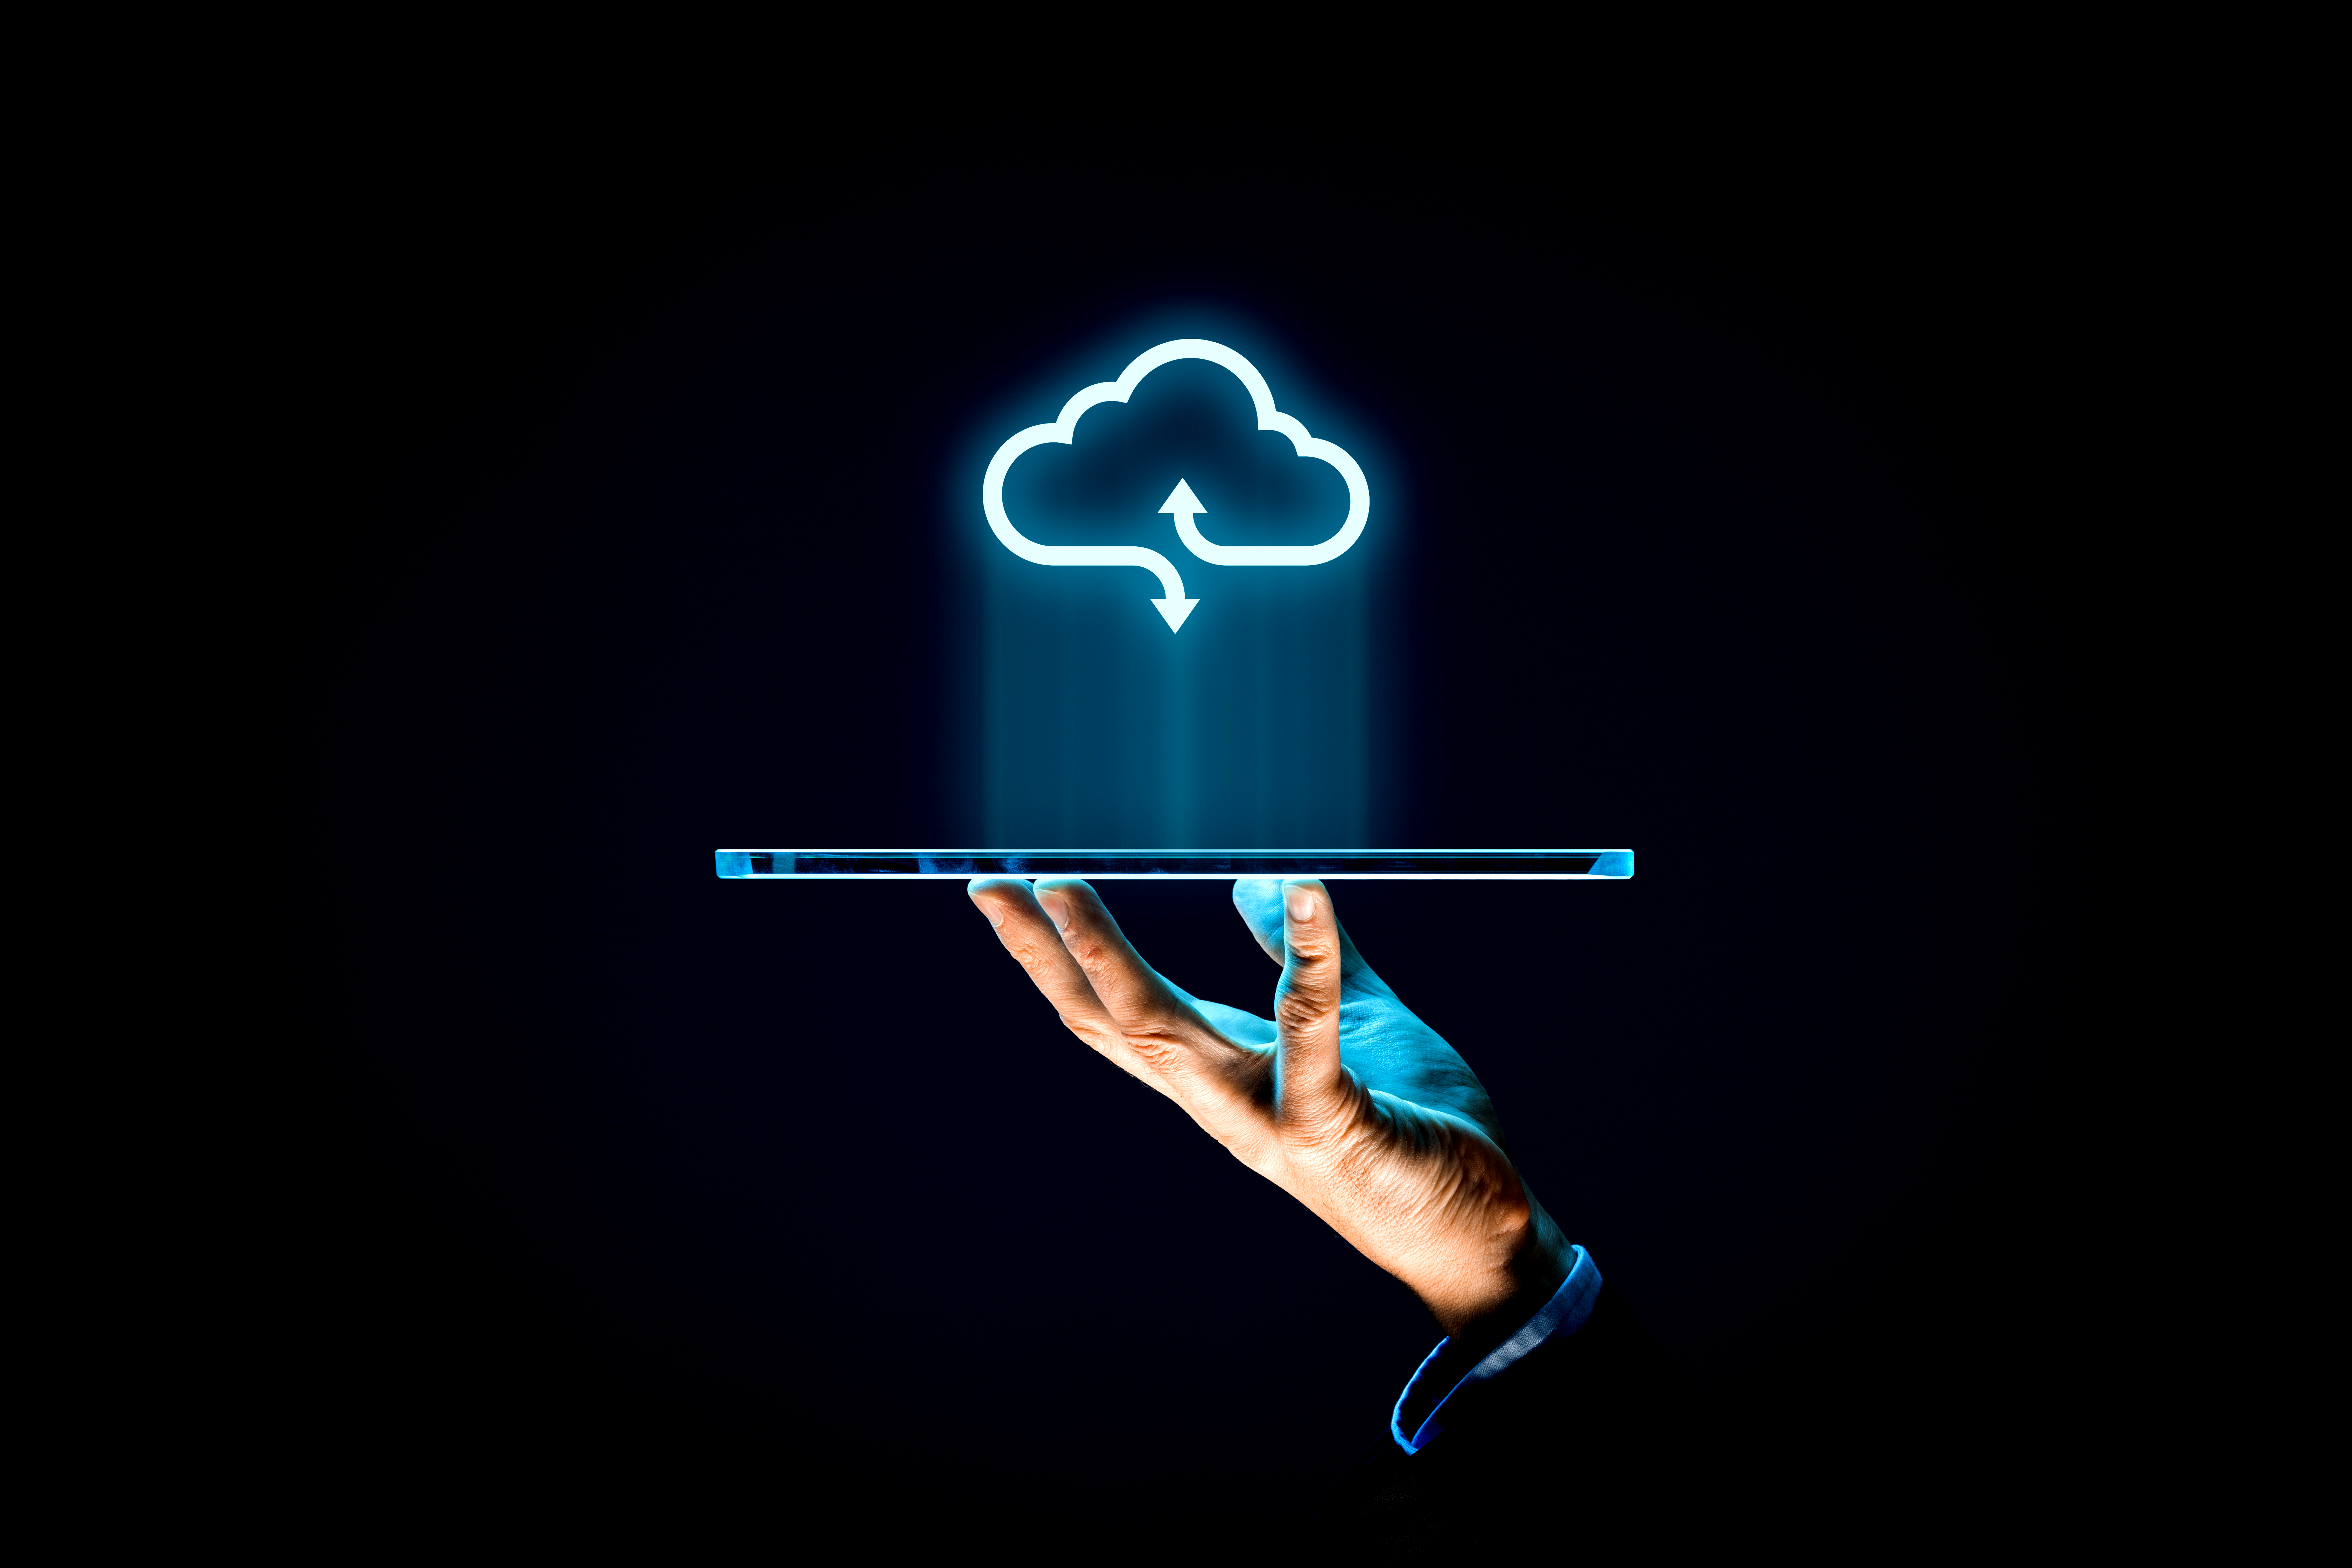 A brief overview of cloud computing